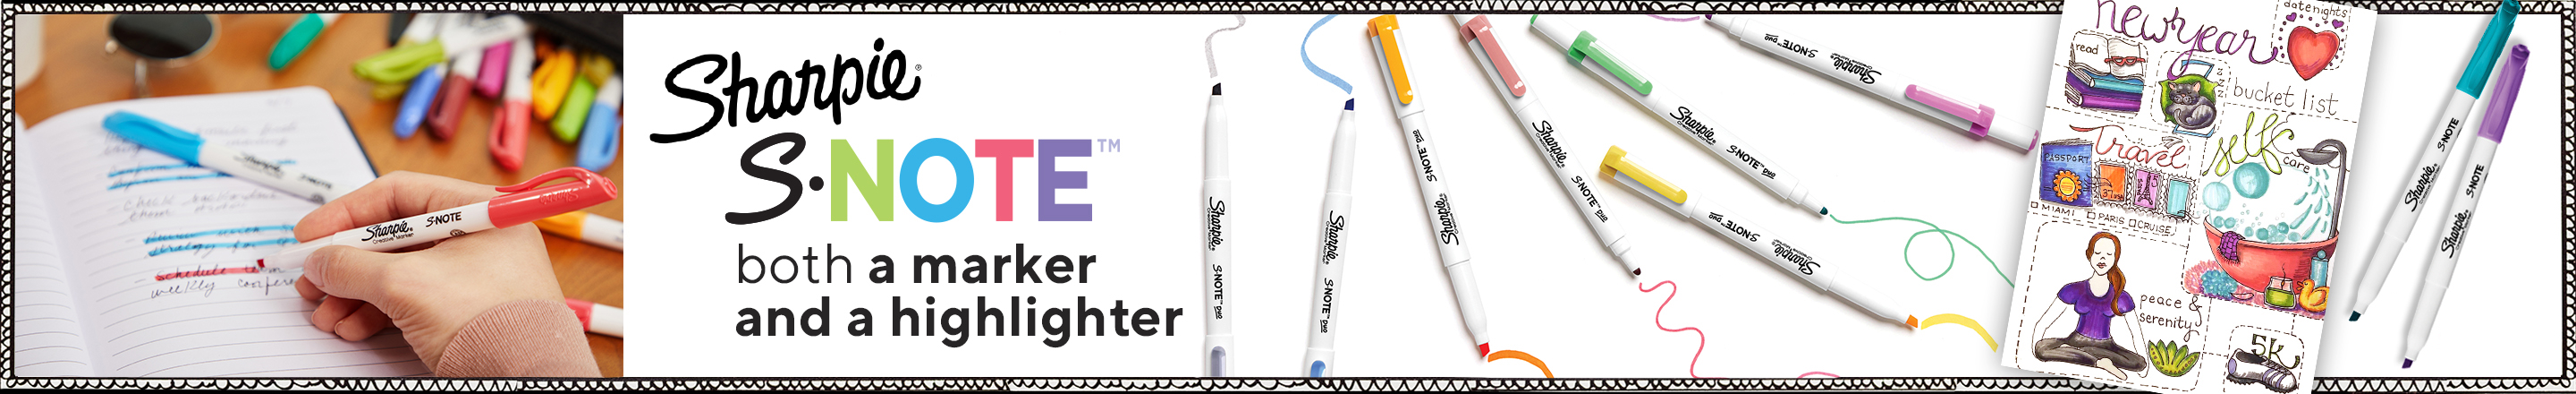 xplore Sharpie's versatile S-Note collection - a combination of marker and highlighter, perfect for all your creative needs.